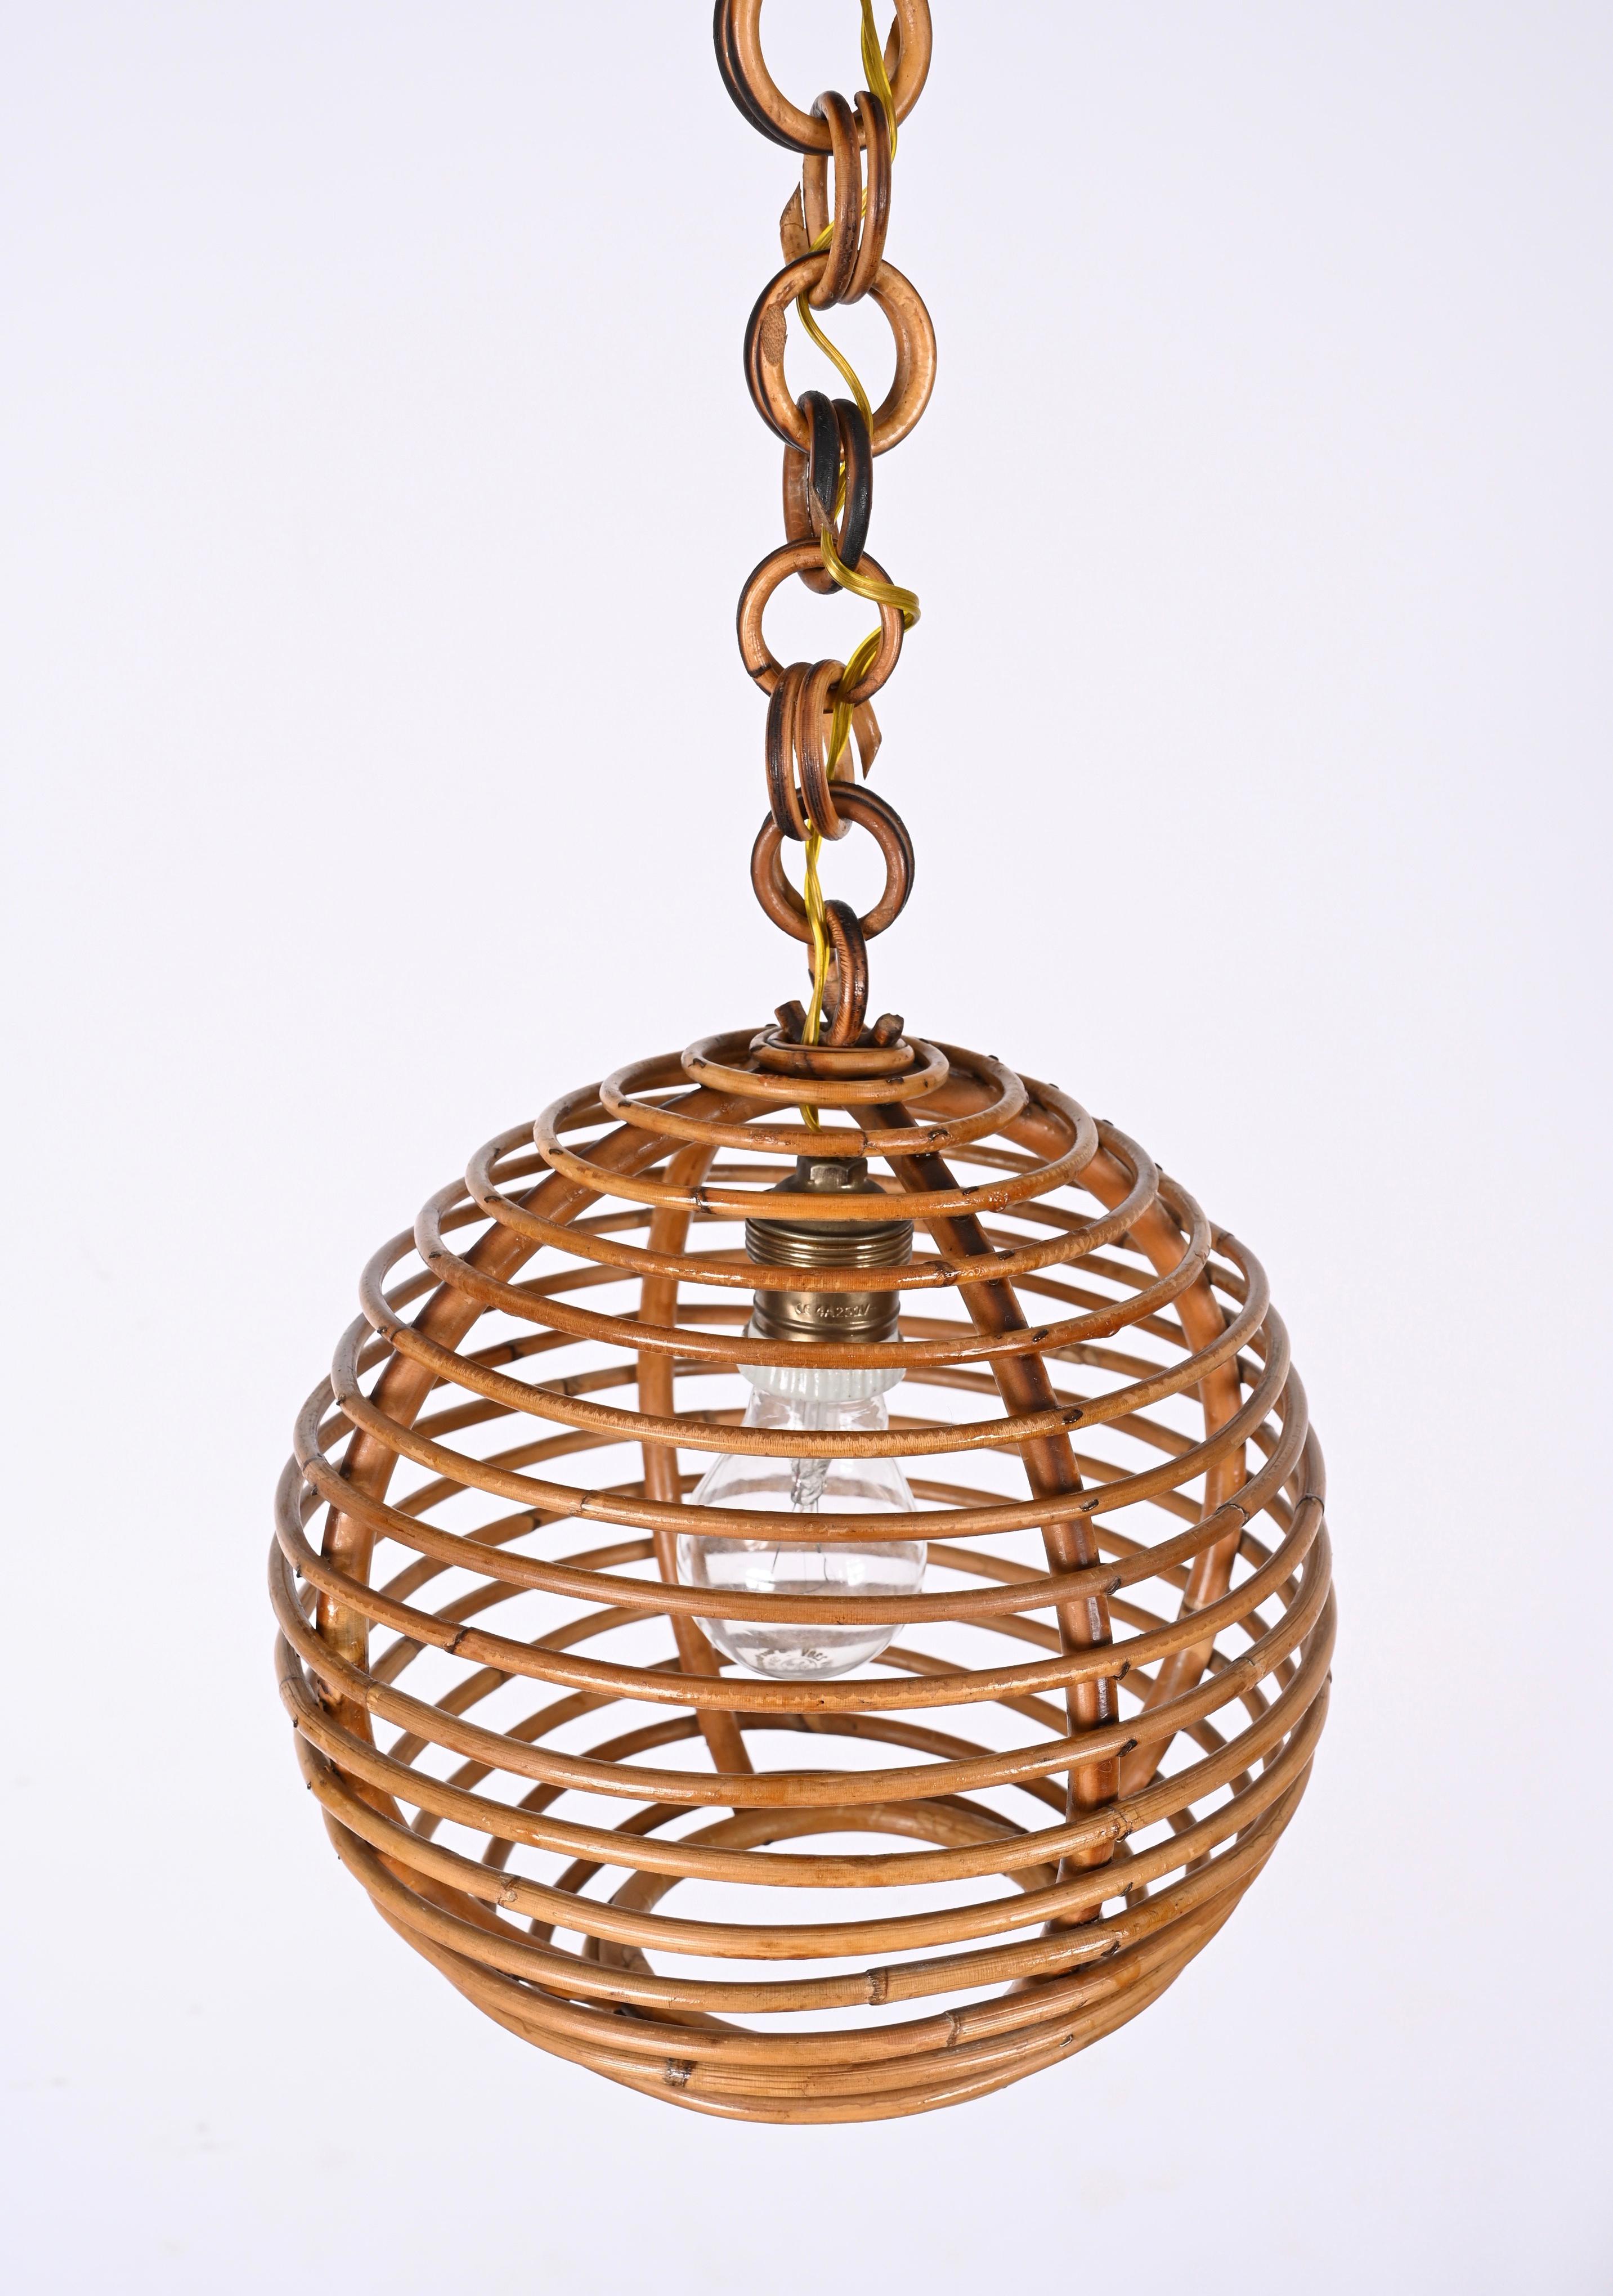 Midcentury French Riviera Bambo and Rattan Spherical Italian Chandelier, 1960s For Sale 1